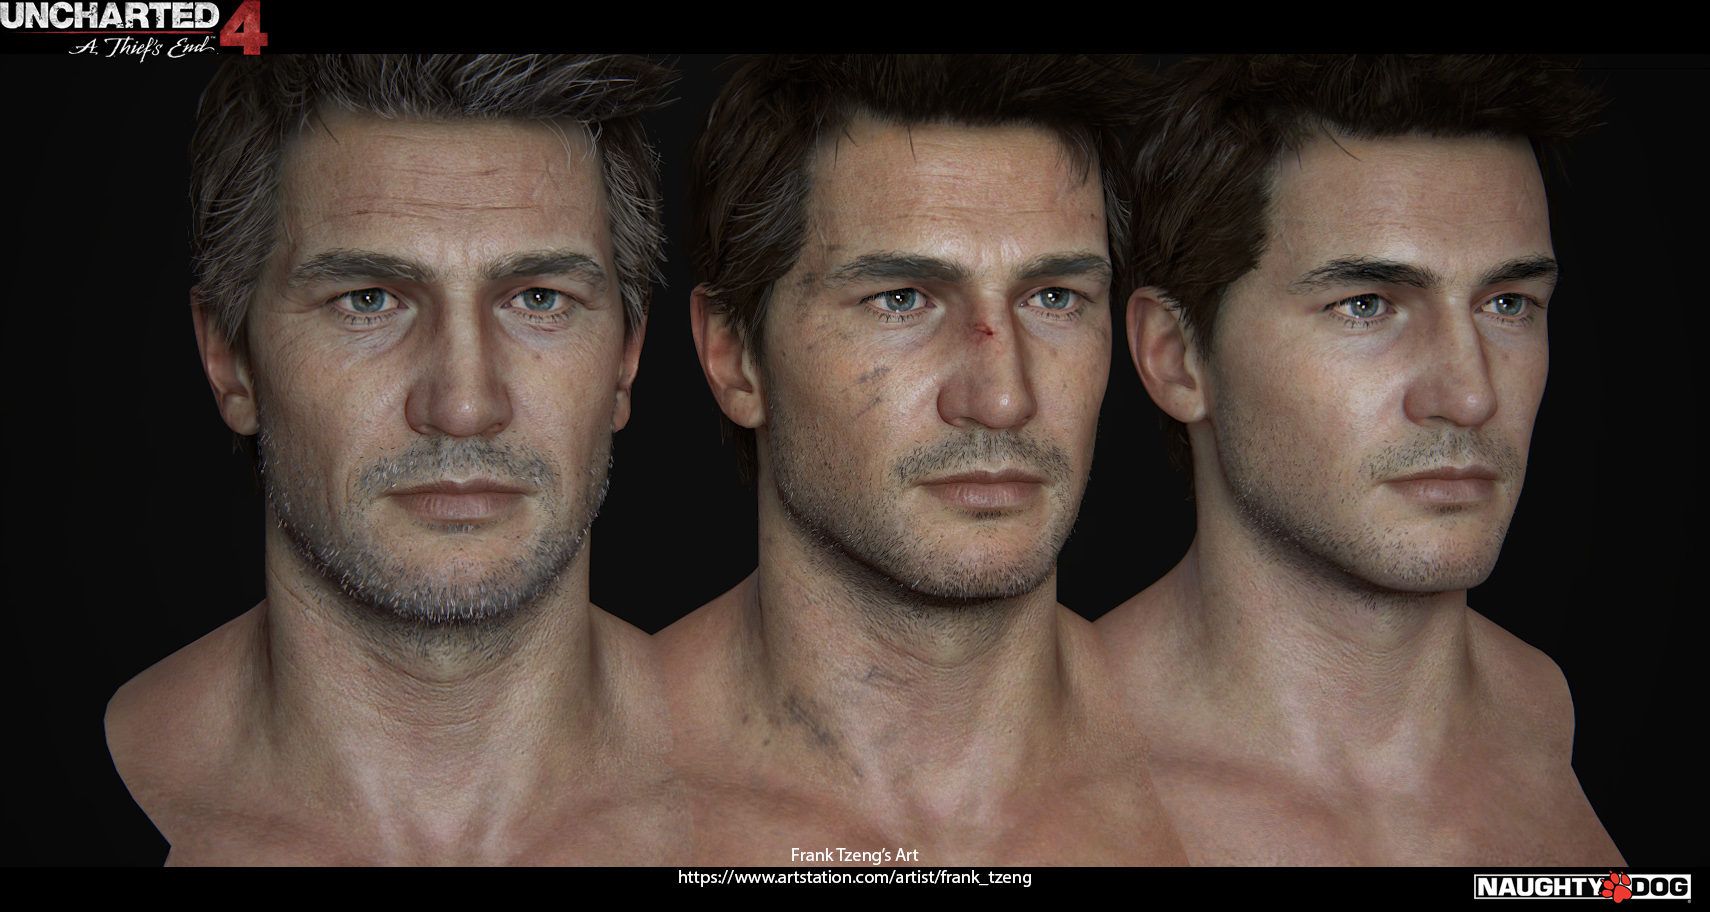 Uncharted 4 character faces contains 500 bones - Uncharted 4: A Thief's End  - Gamereactor